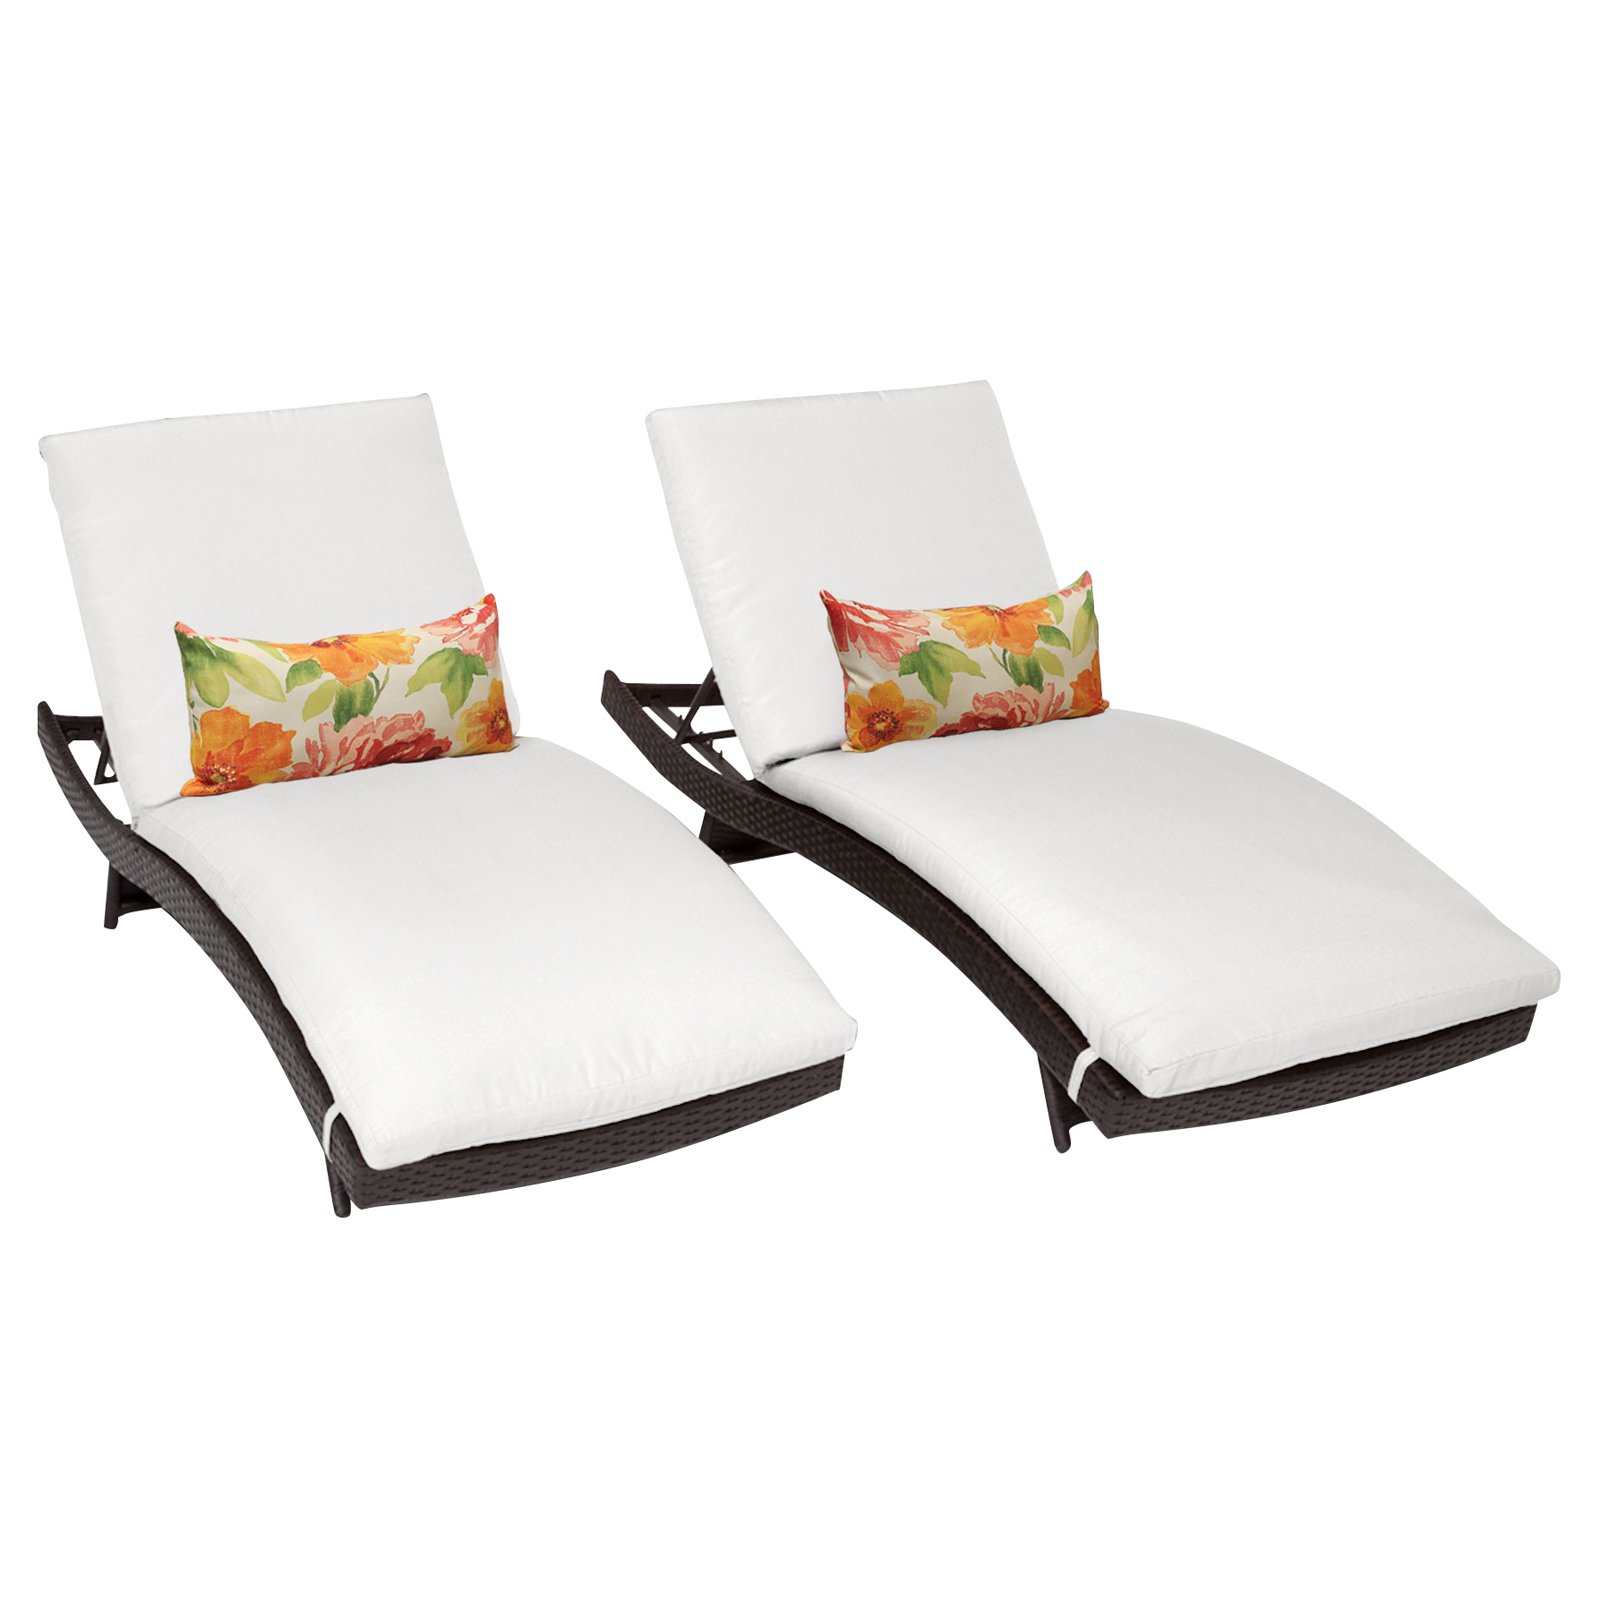 Barbados Curved Chaise Outdoor Wicker Patio Furniture in White (Set of 2) - image 1 of 4